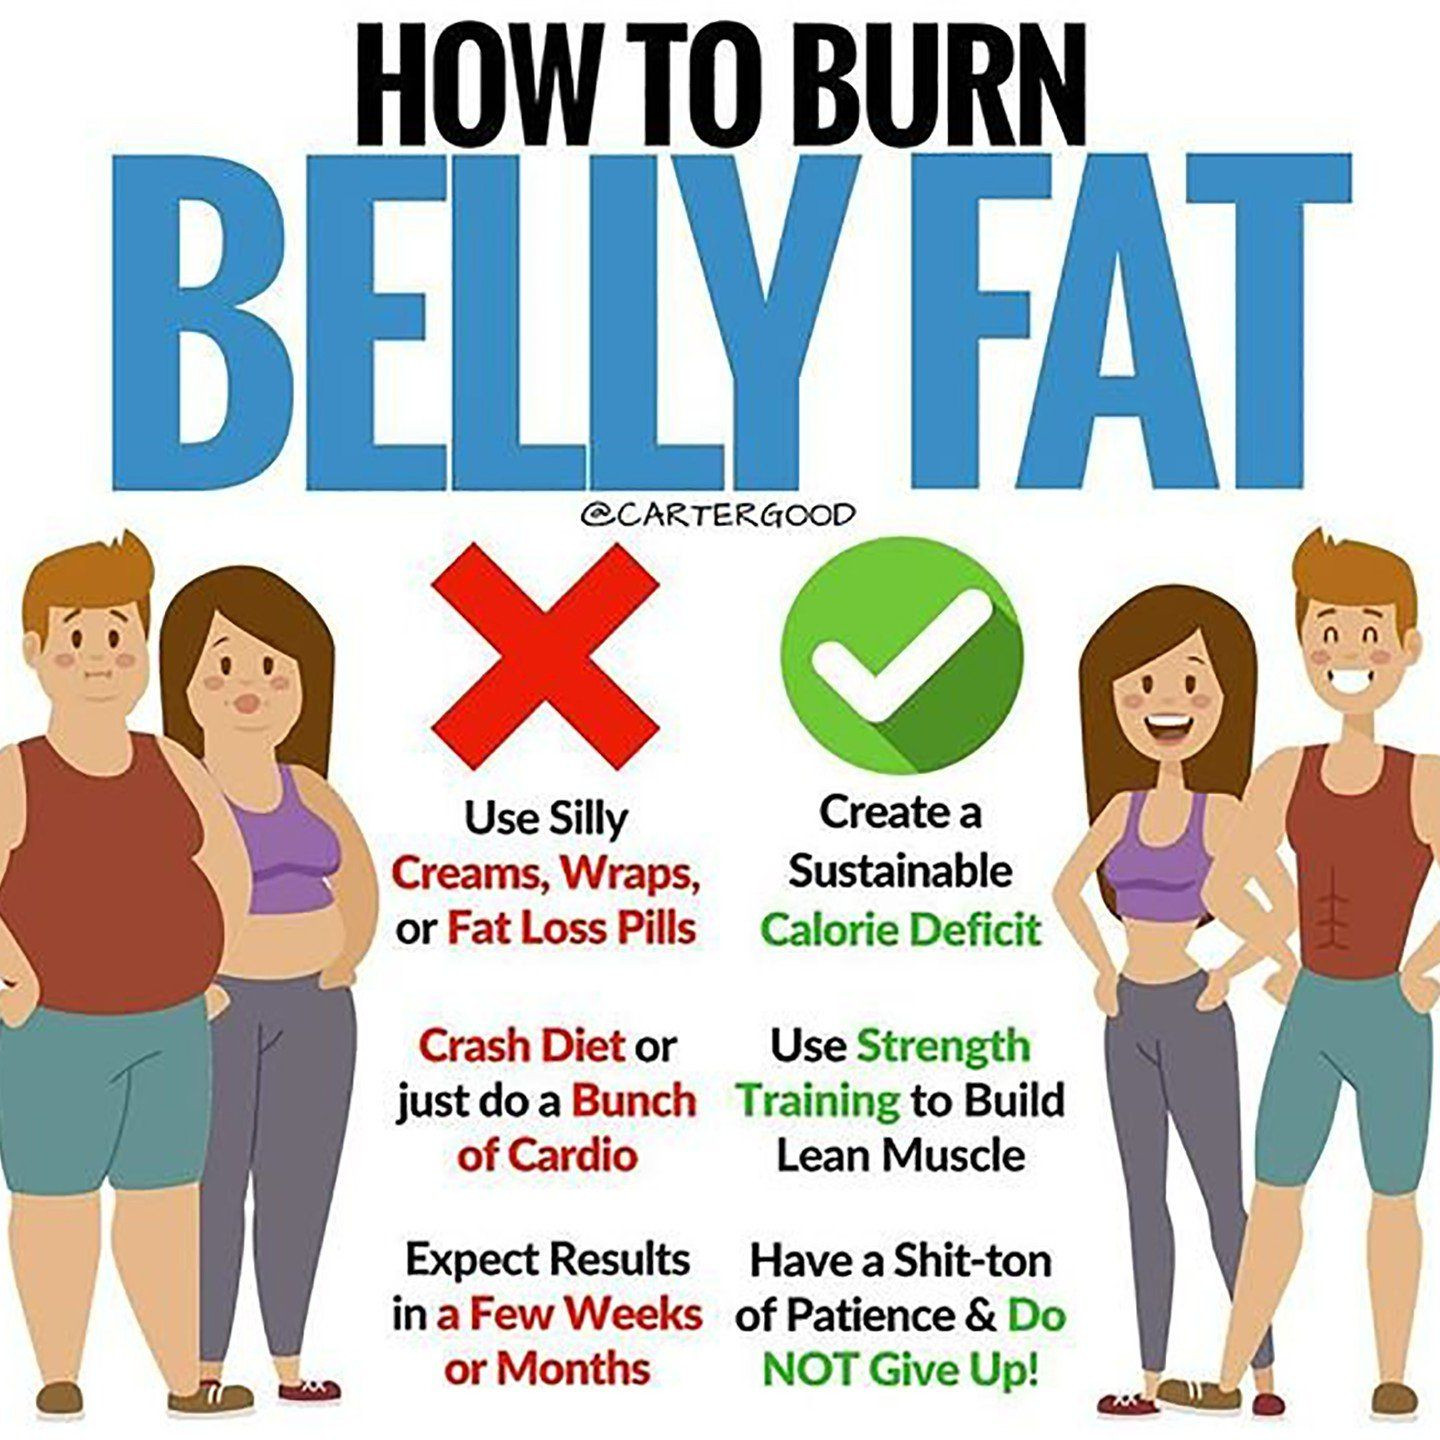 Ways To Burn Belly Fat
 A Fat Loss Coach Says to Do These 3 Things to Burn Belly